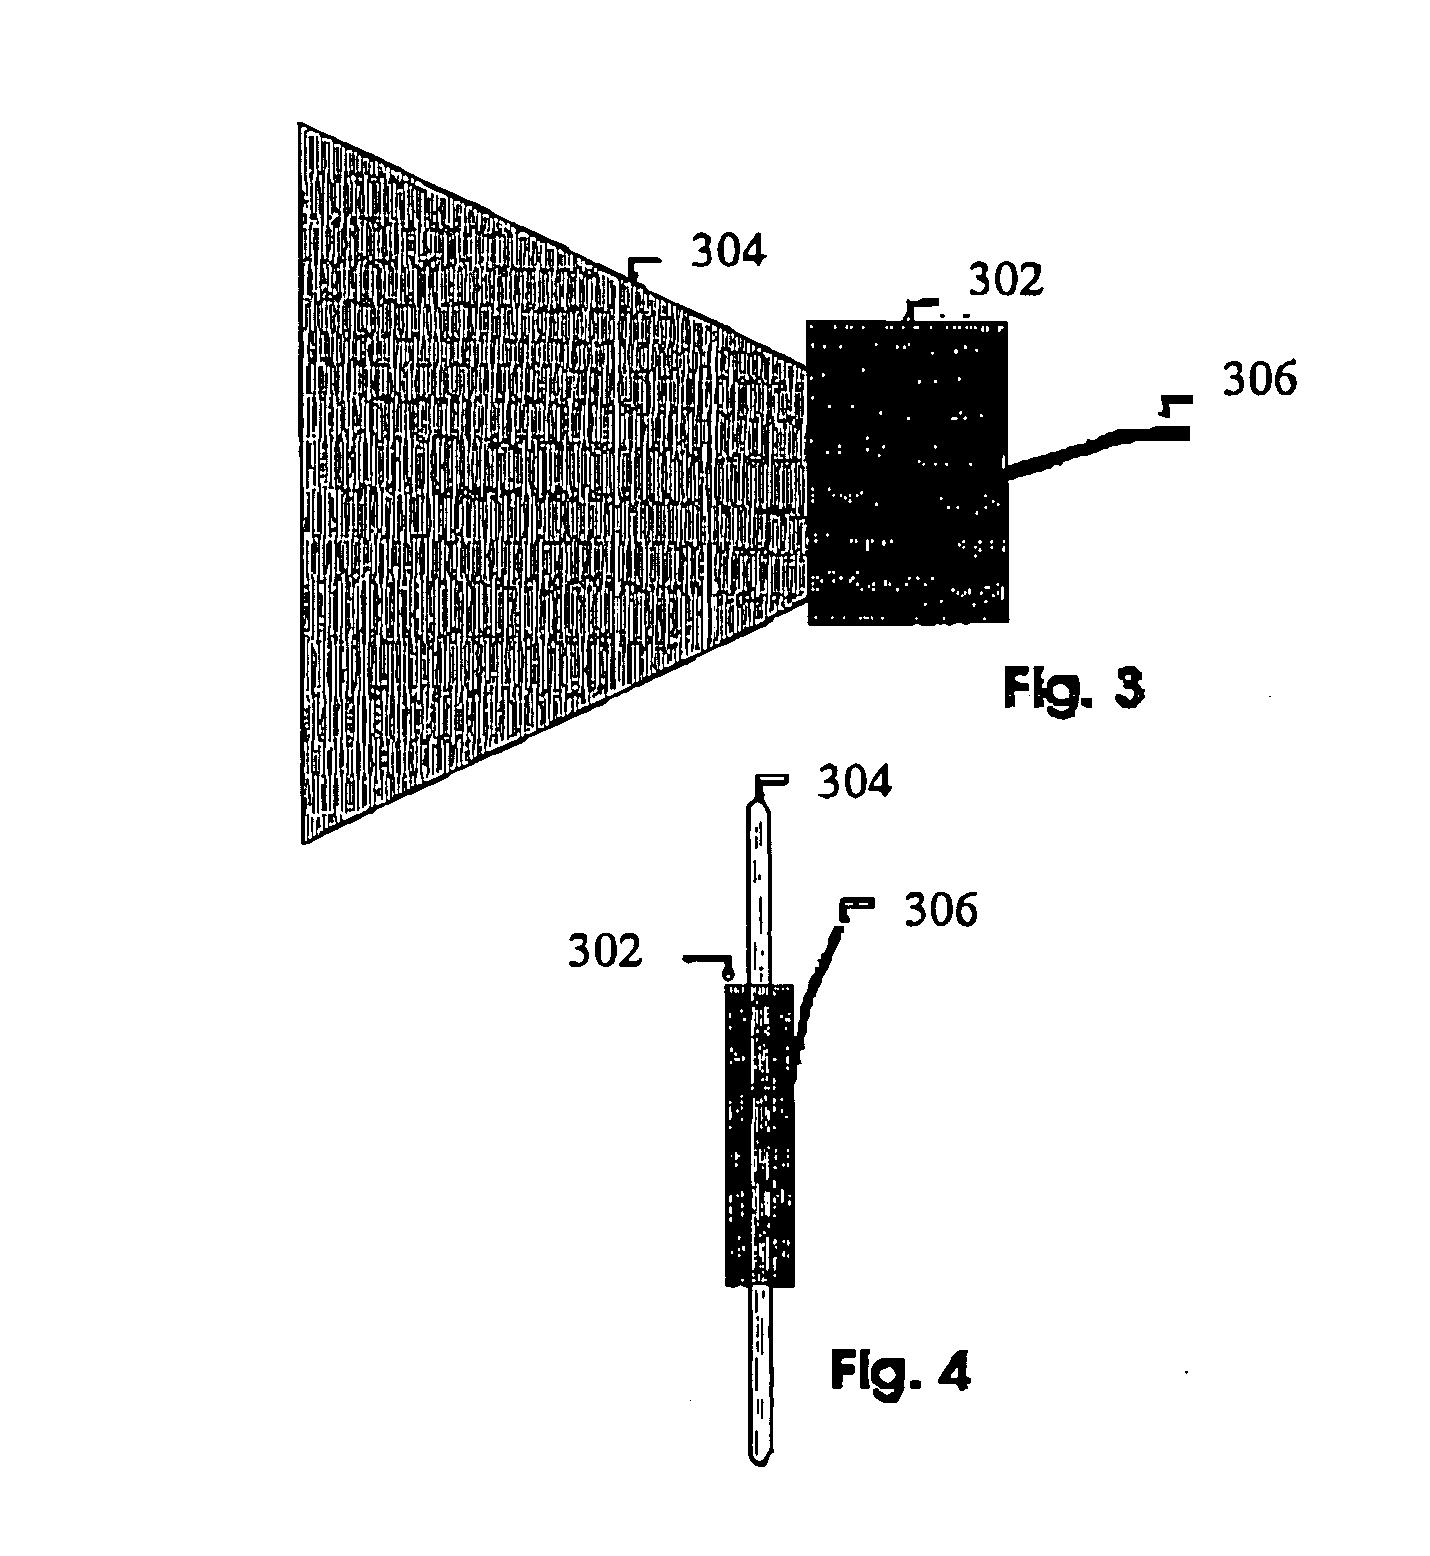 System and method for notifying a cashier of the presence of an item in an obscured area of a shopping cart